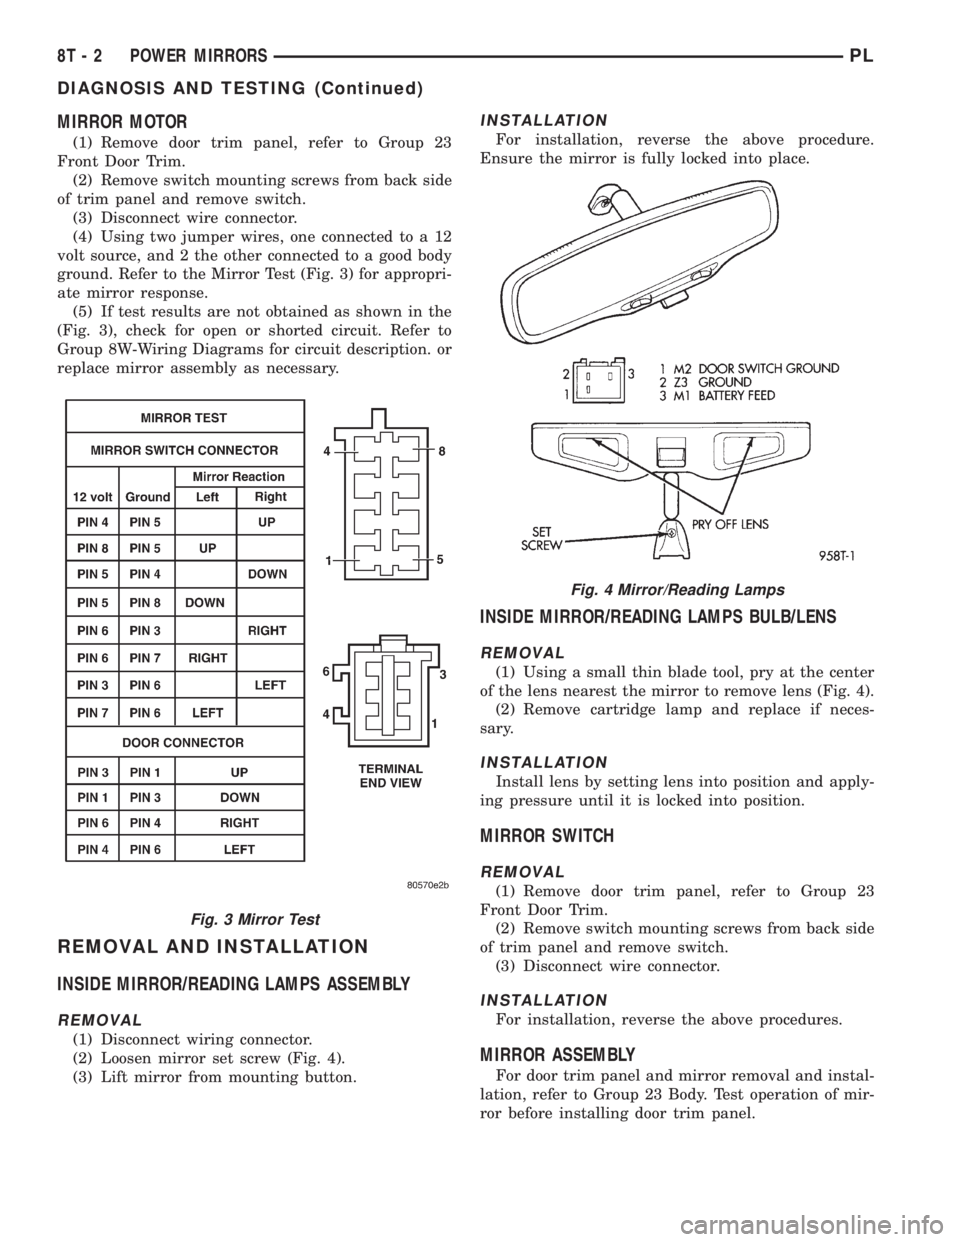 DODGE NEON 1999  Service Repair Manual MIRROR MOTOR
(1) Remove door trim panel, refer to Group 23
Front Door Trim.
(2) Remove switch mounting screws from back side
of trim panel and remove switch.
(3) Disconnect wire connector.
(4) Using t